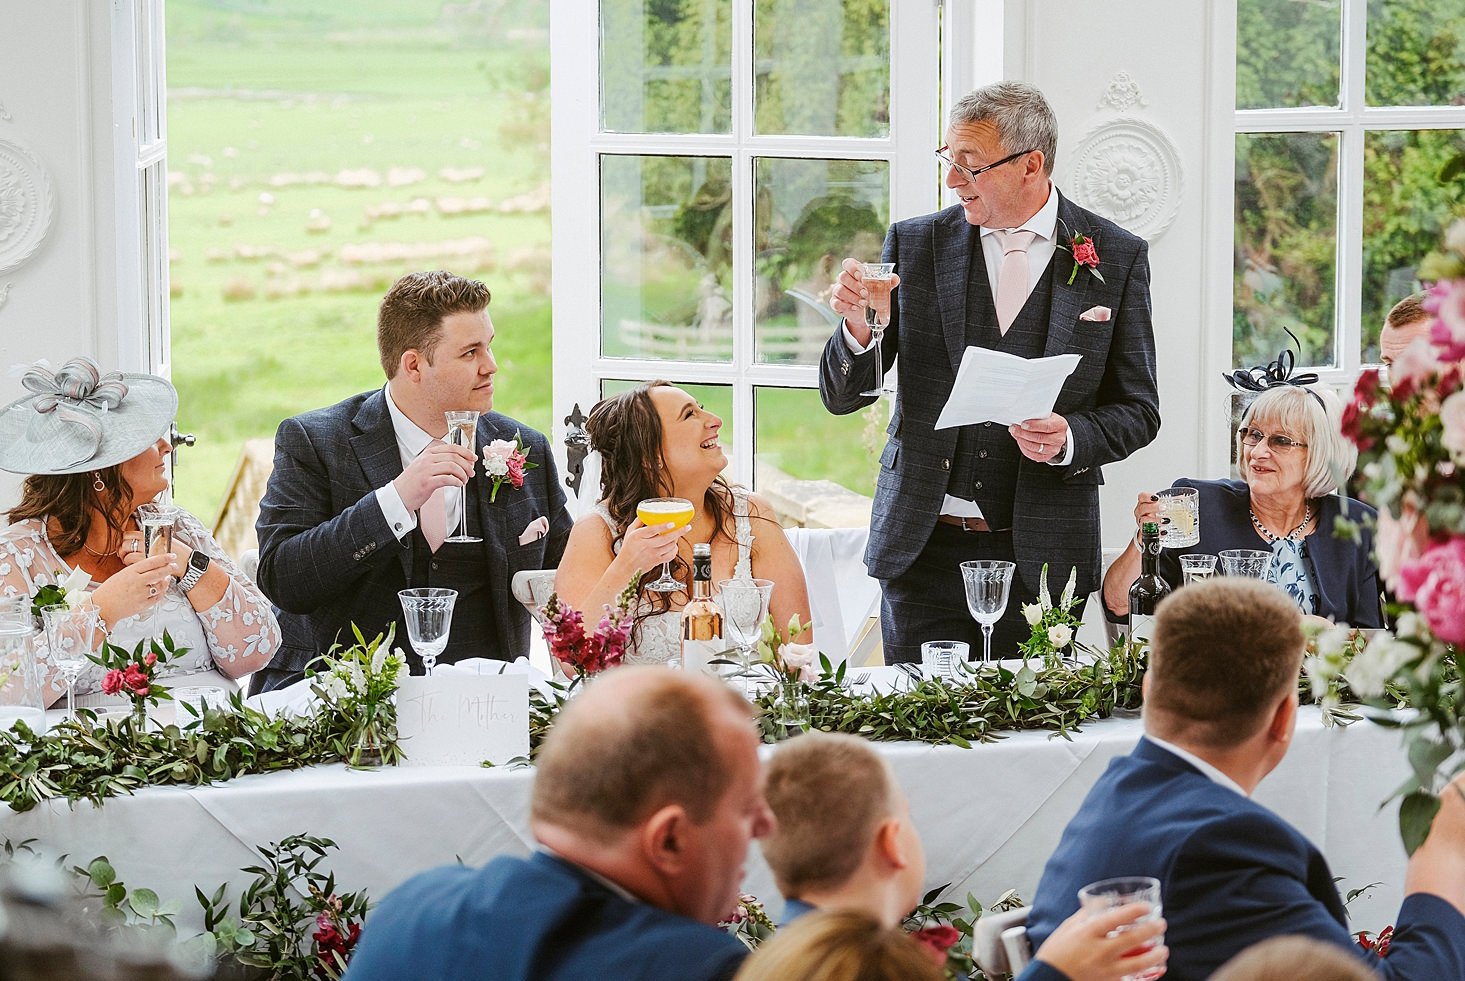 Raising a glass to love, laughter, and a lifetime of beautiful memories.

#wedding #weddings #weddingday #photo #photography #photographer #weddingphotography #weddingphotographer #northeastphotography #northeastwedding #northeastweddings #northeastw